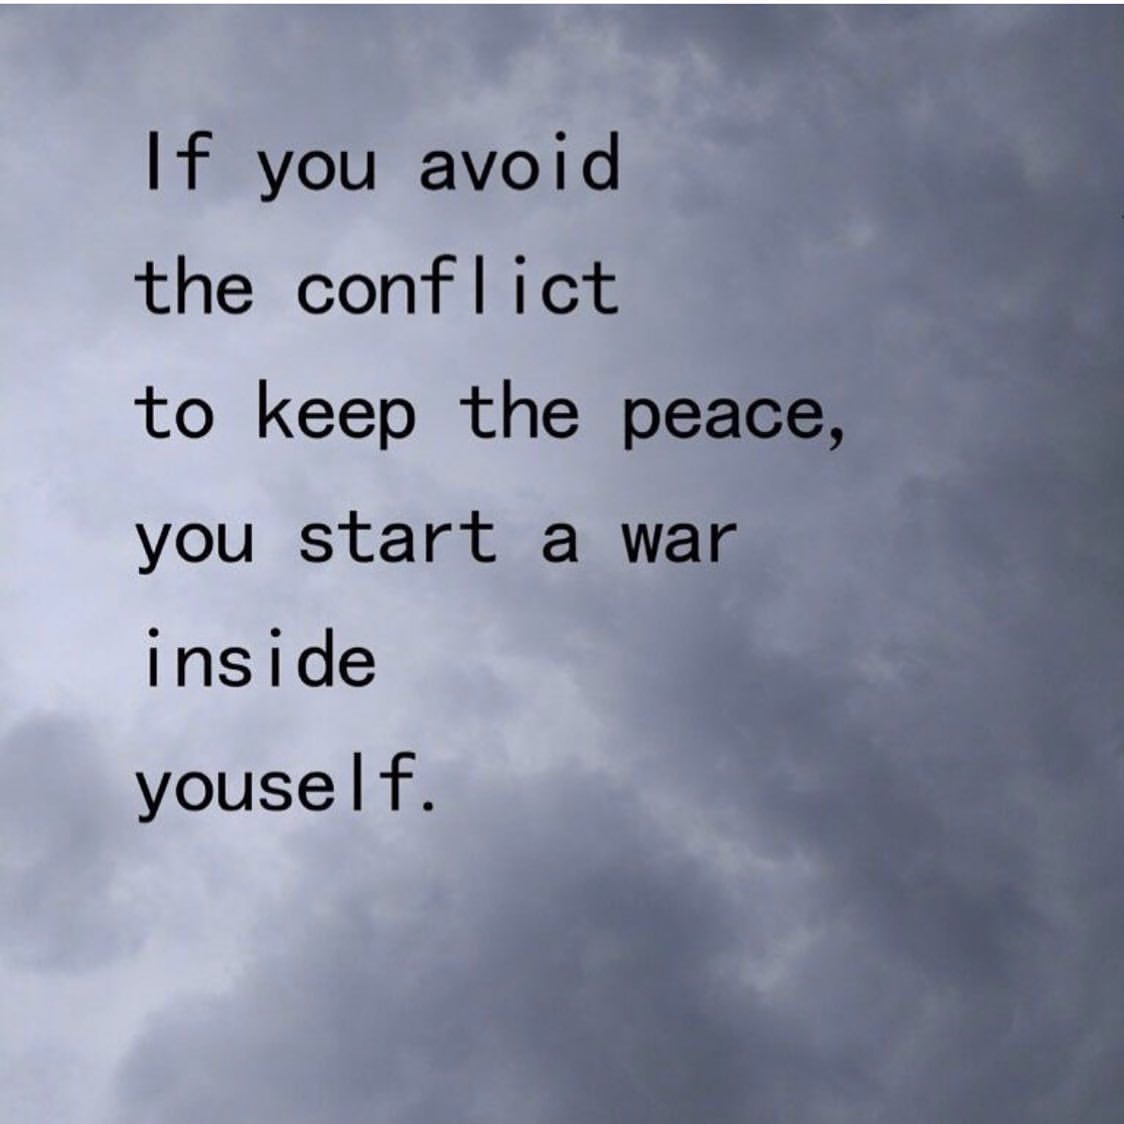 If you avoid the conflict to keep the peace, you start a war inside yourself.